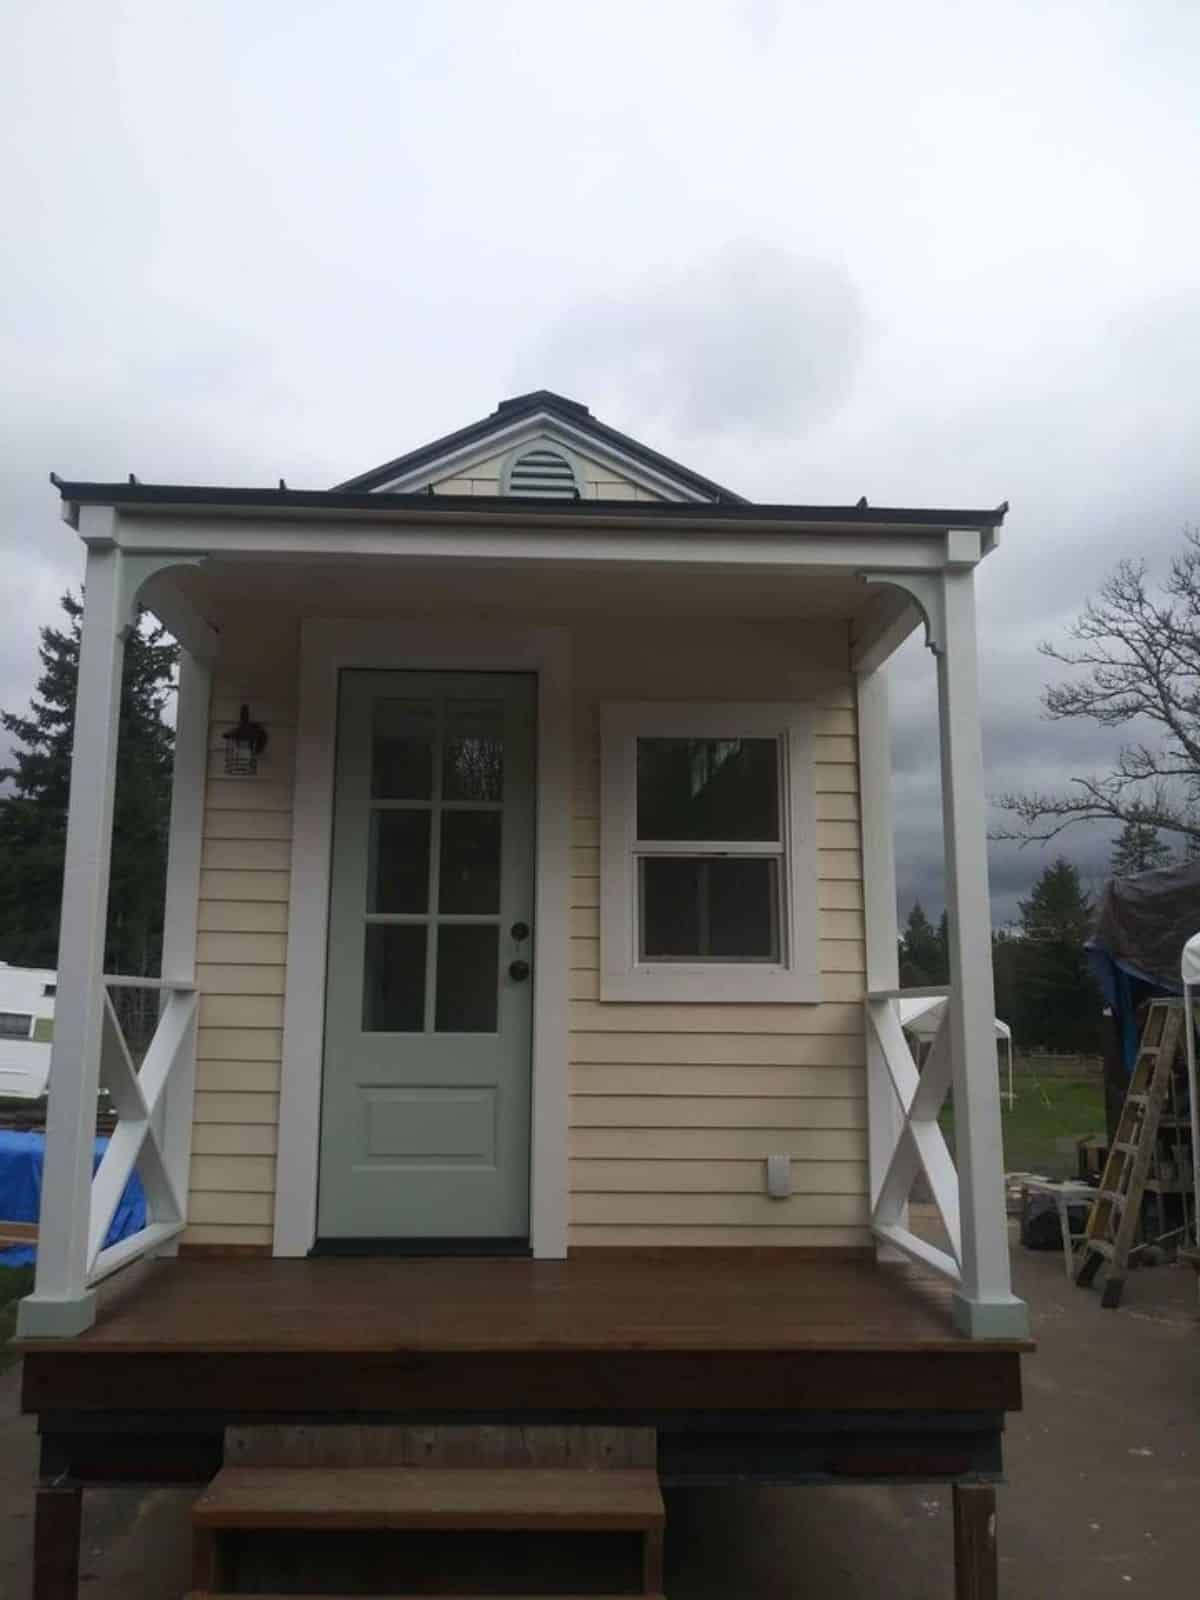 Main door view of 24’ Tiny House Can Be Your Studio or Workspace